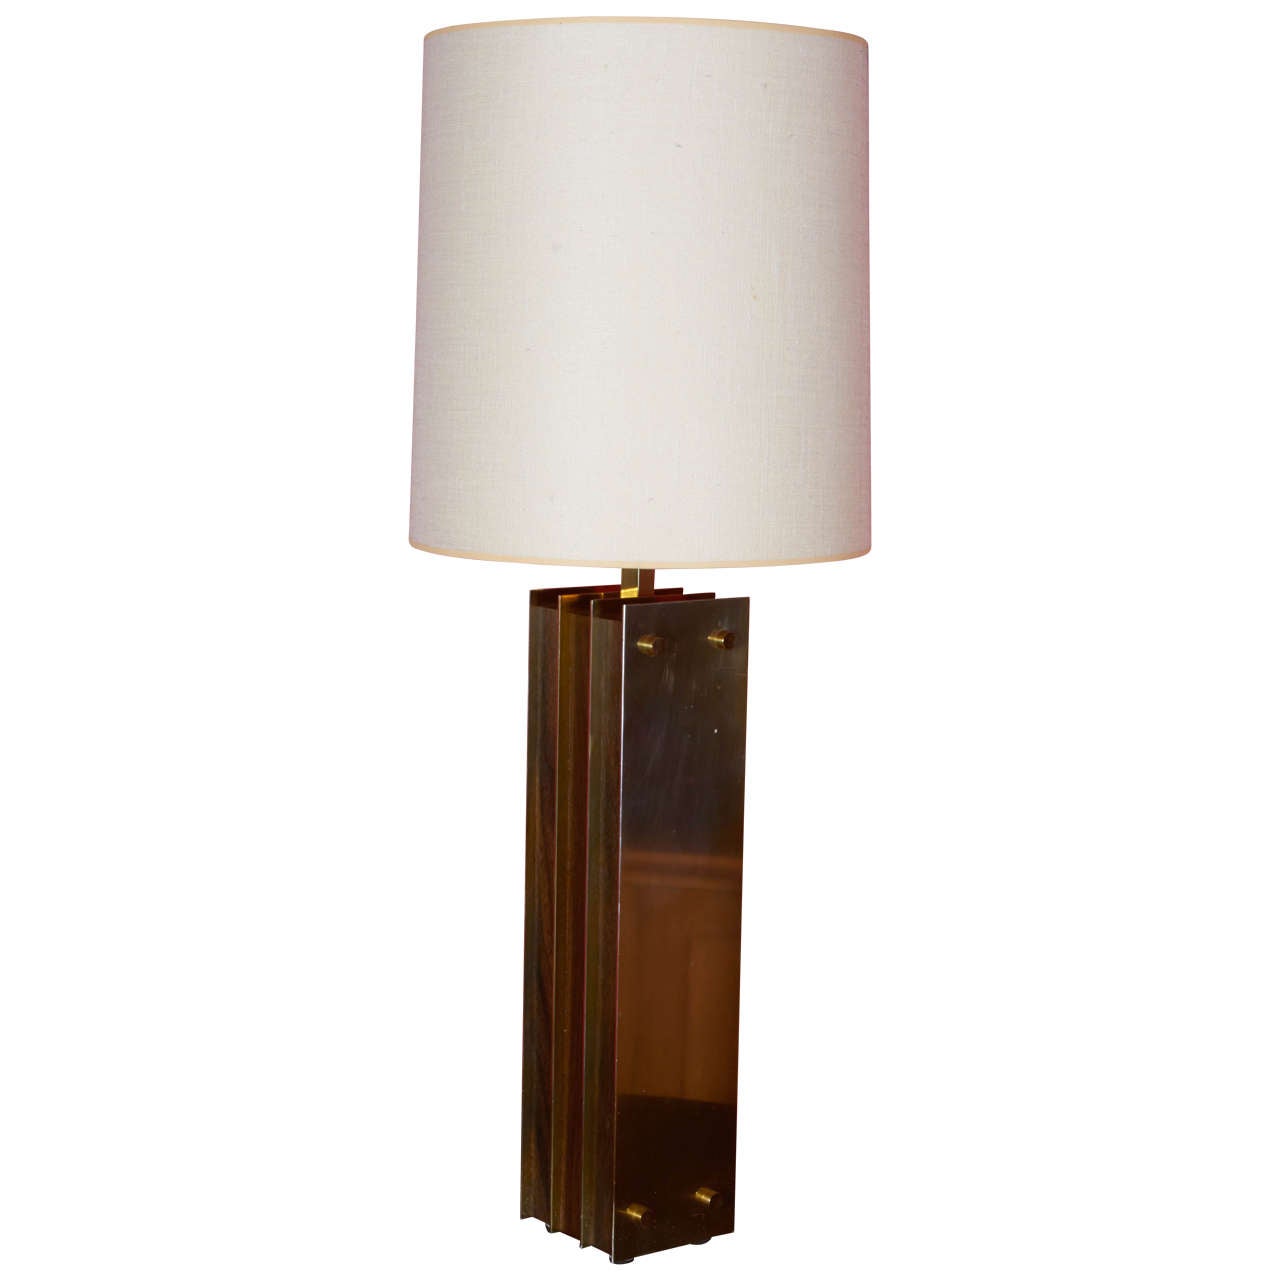 I beam table lamps with wood and brass construction, manufactured by Laurel in the 1950s.